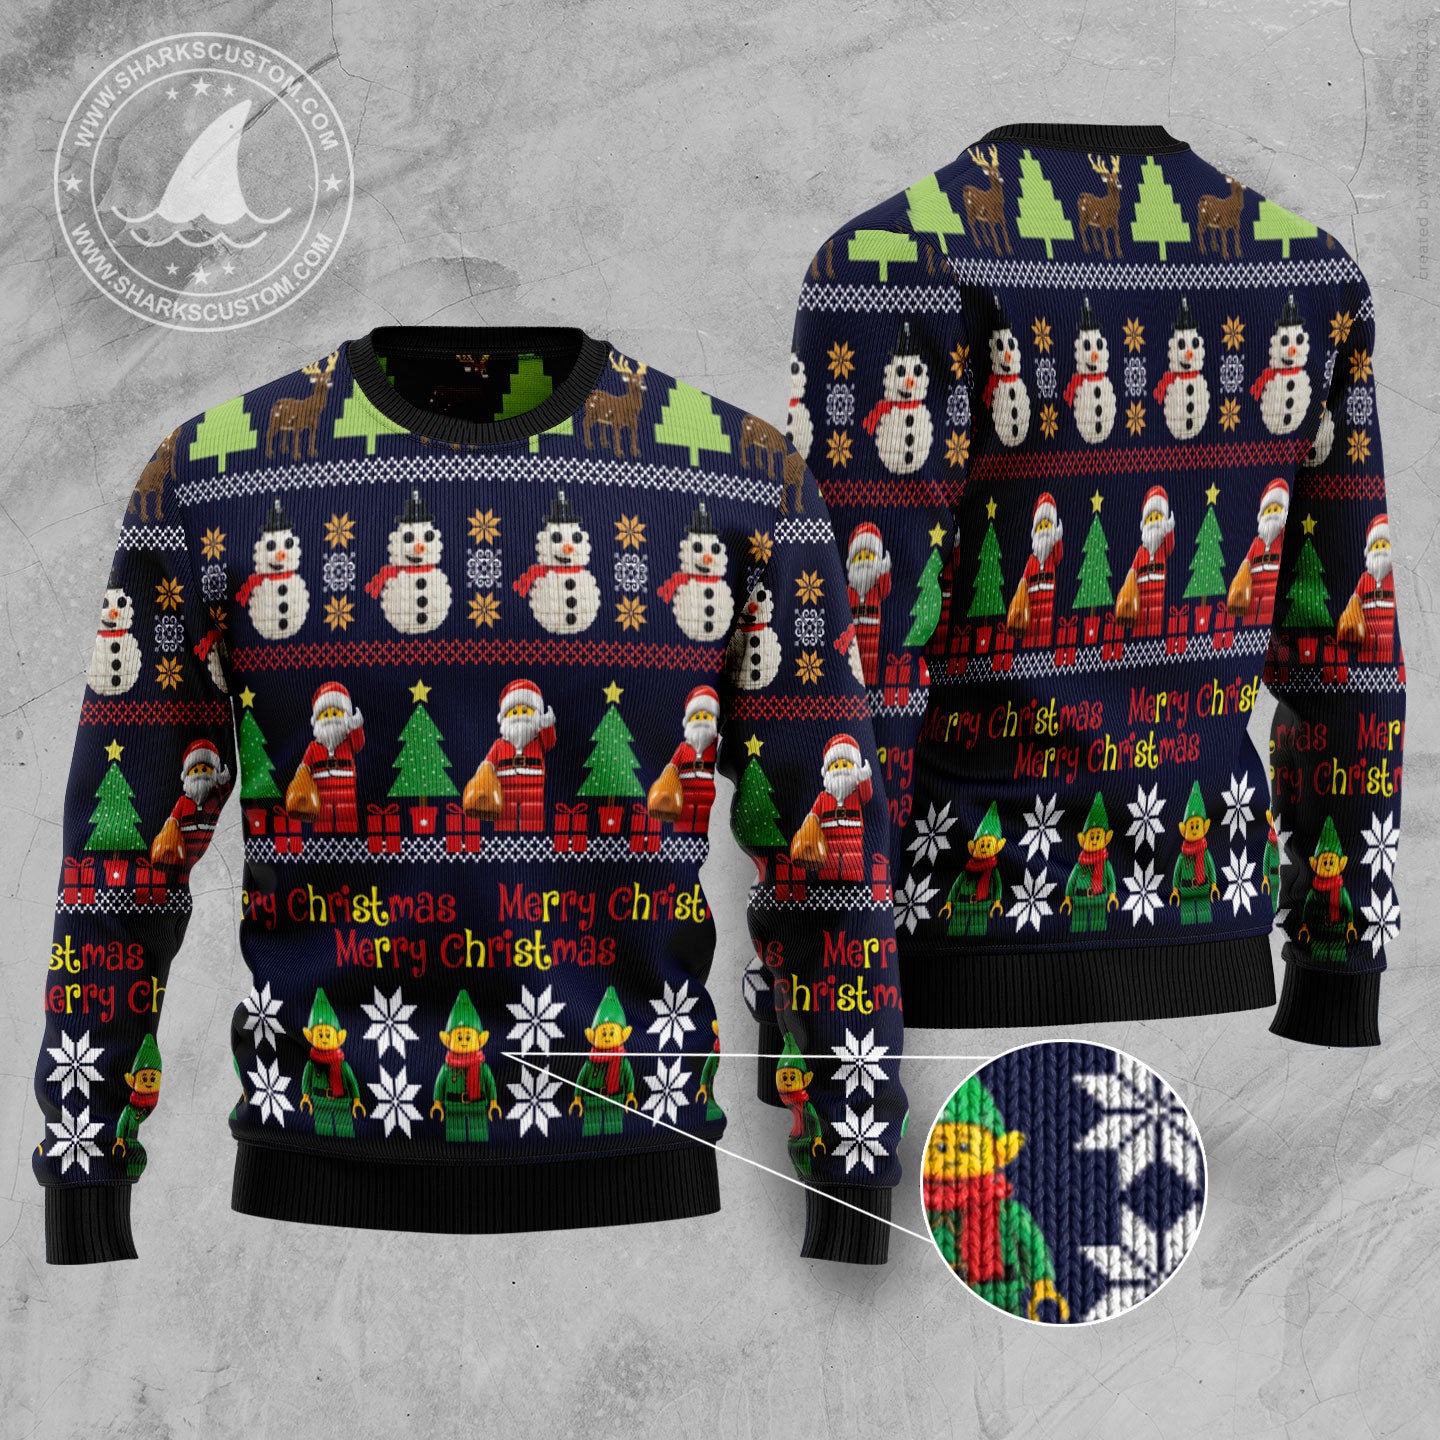 Lego Christmas Awesome TY2011 unisex womens & mens, couples matching, friends, funny family ugly christmas holiday sweater gifts (plus size available)